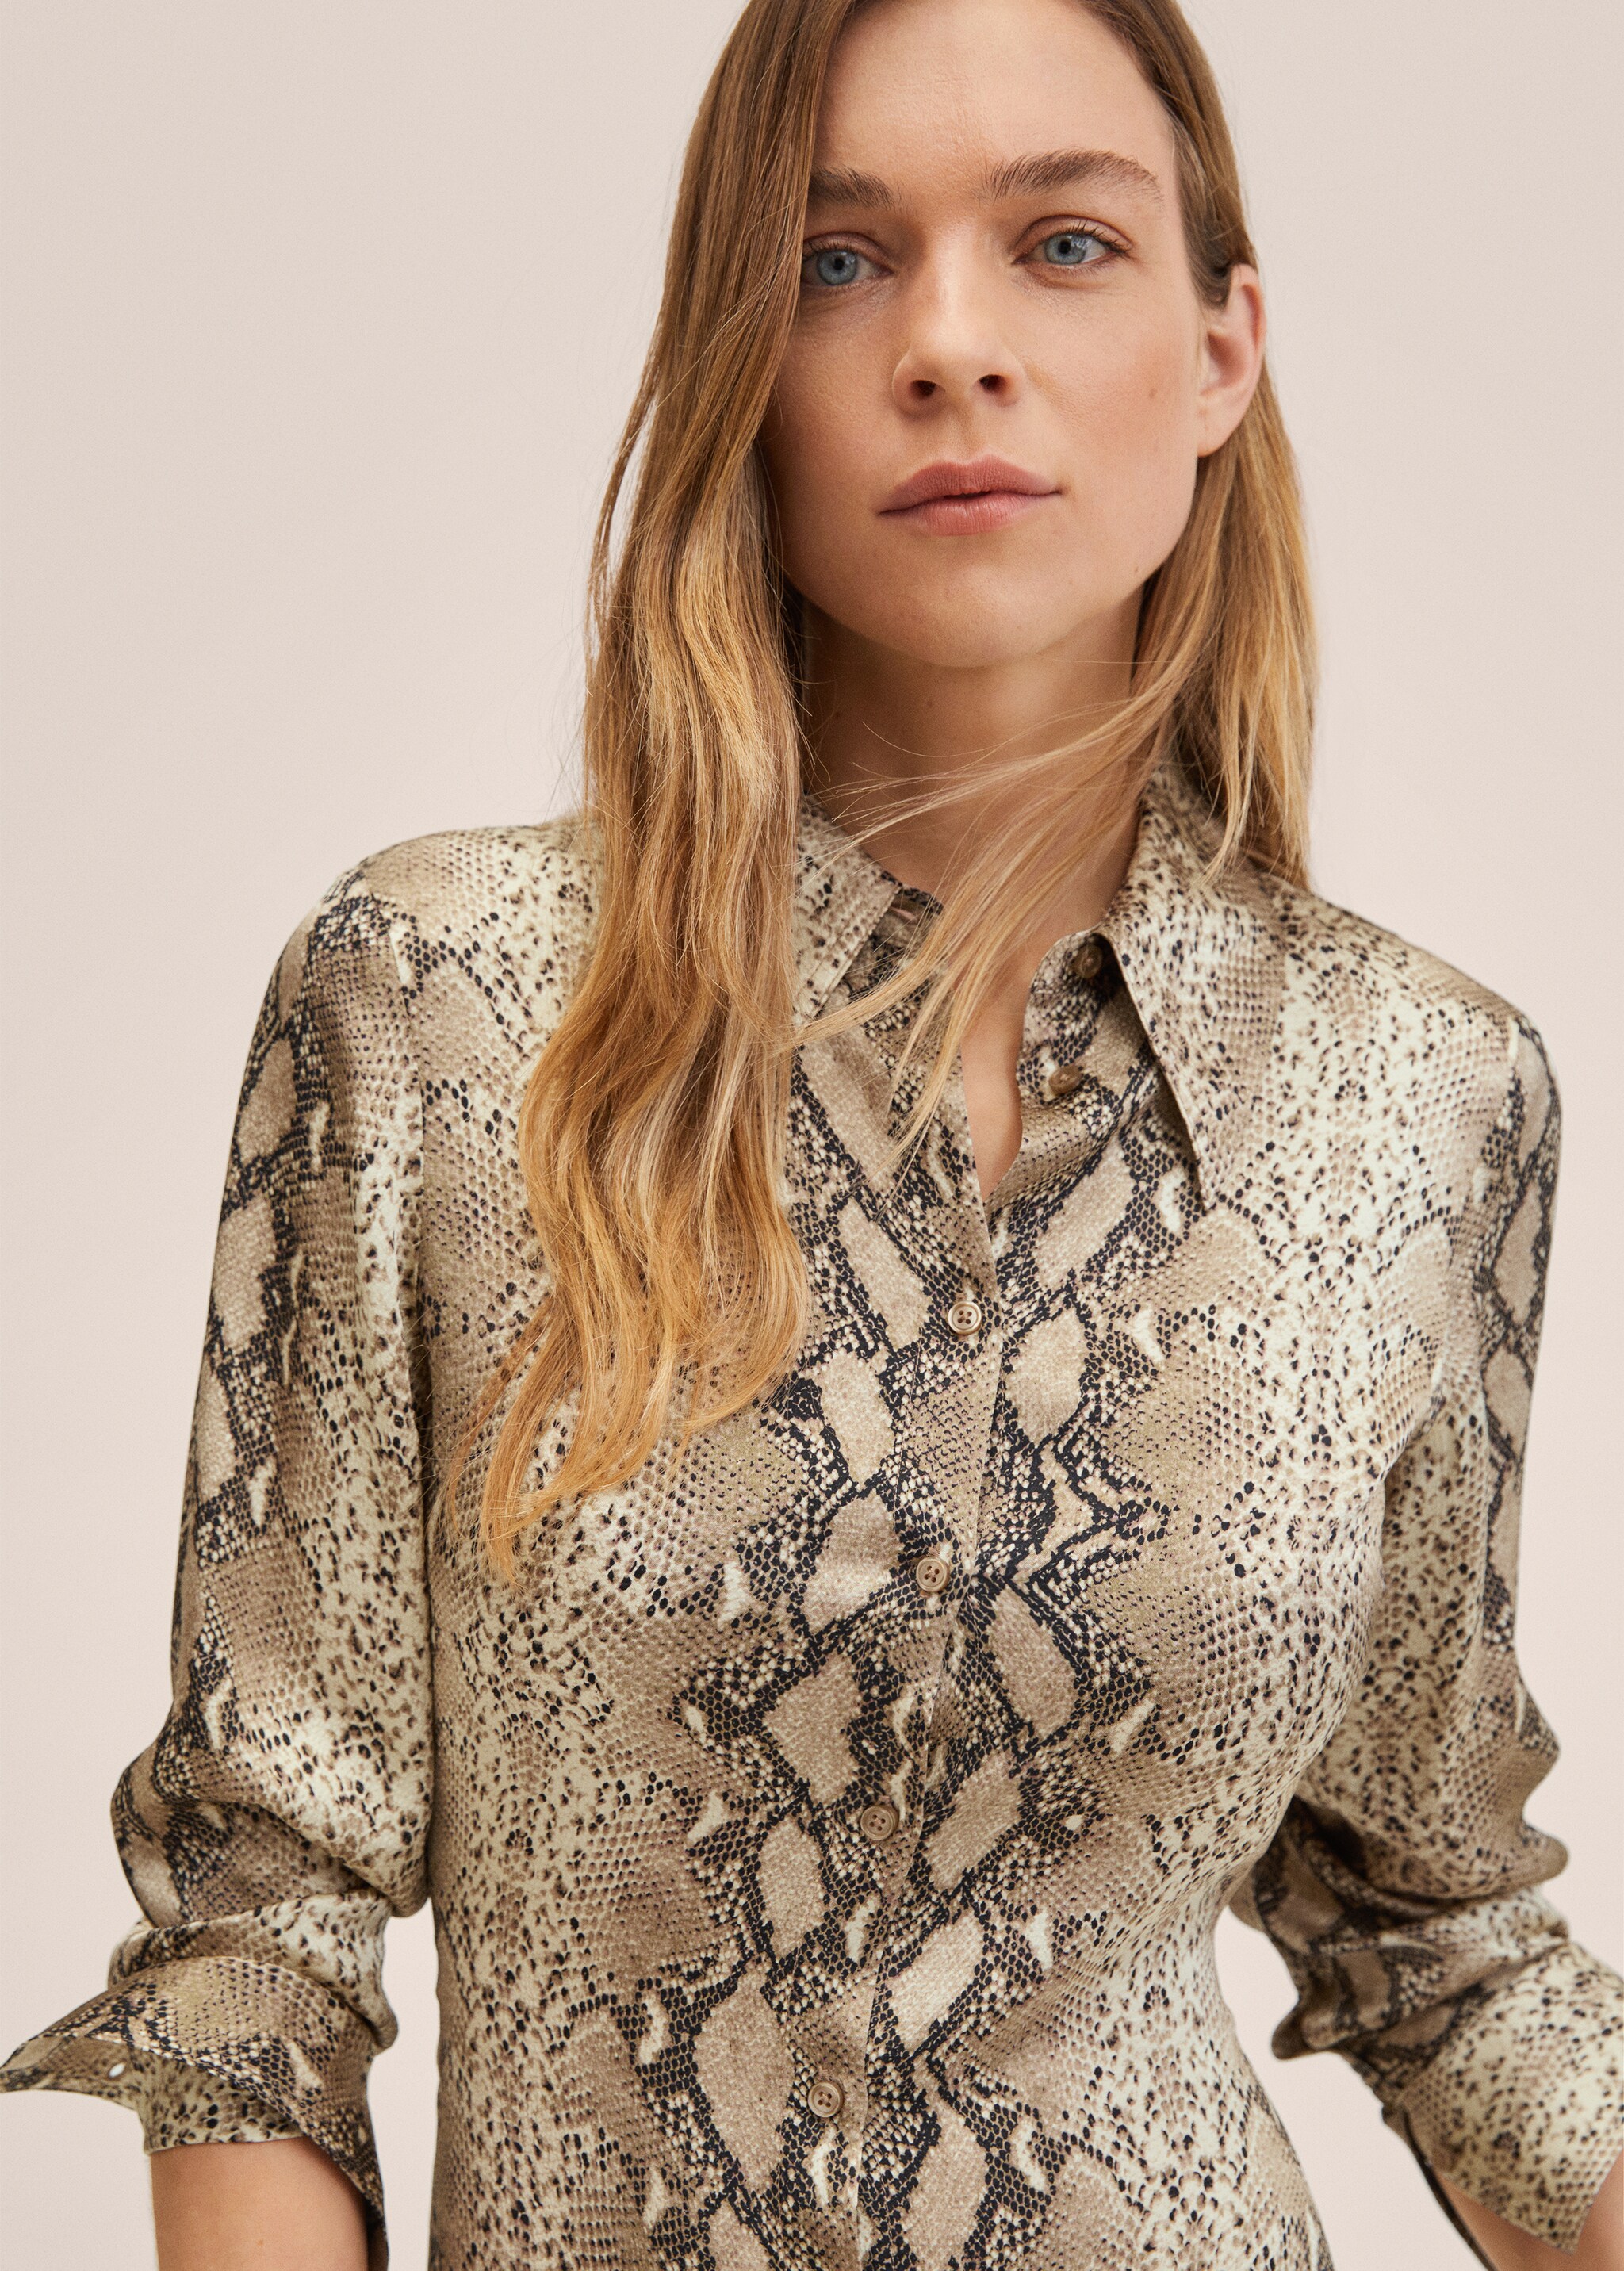 Animal print shirt dress - Details of the article 1